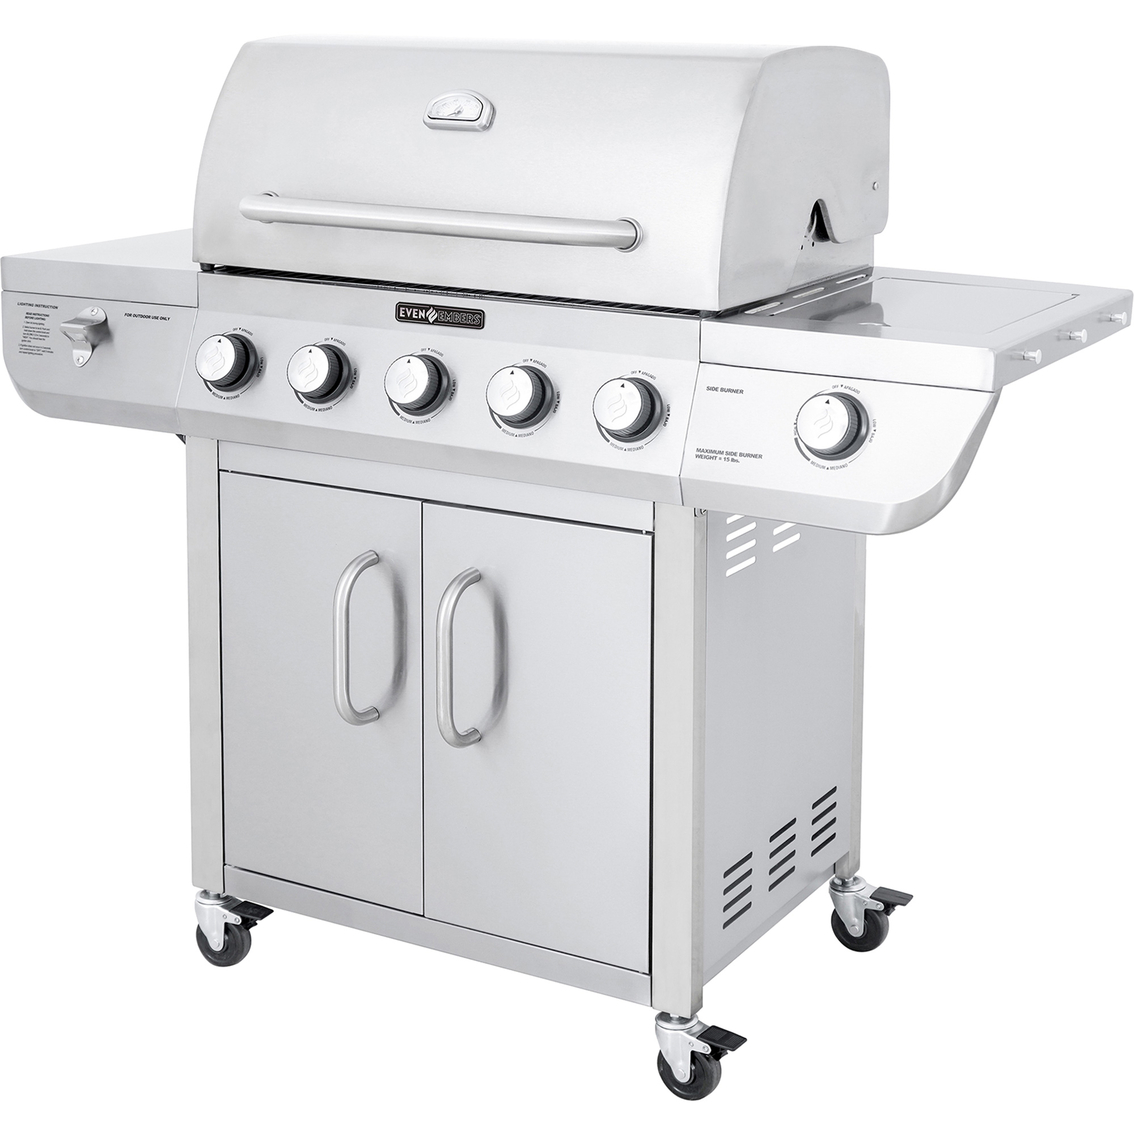 Even Embers 5 Burner Stainless Steel LP Gas Grill - Image 1 of 9